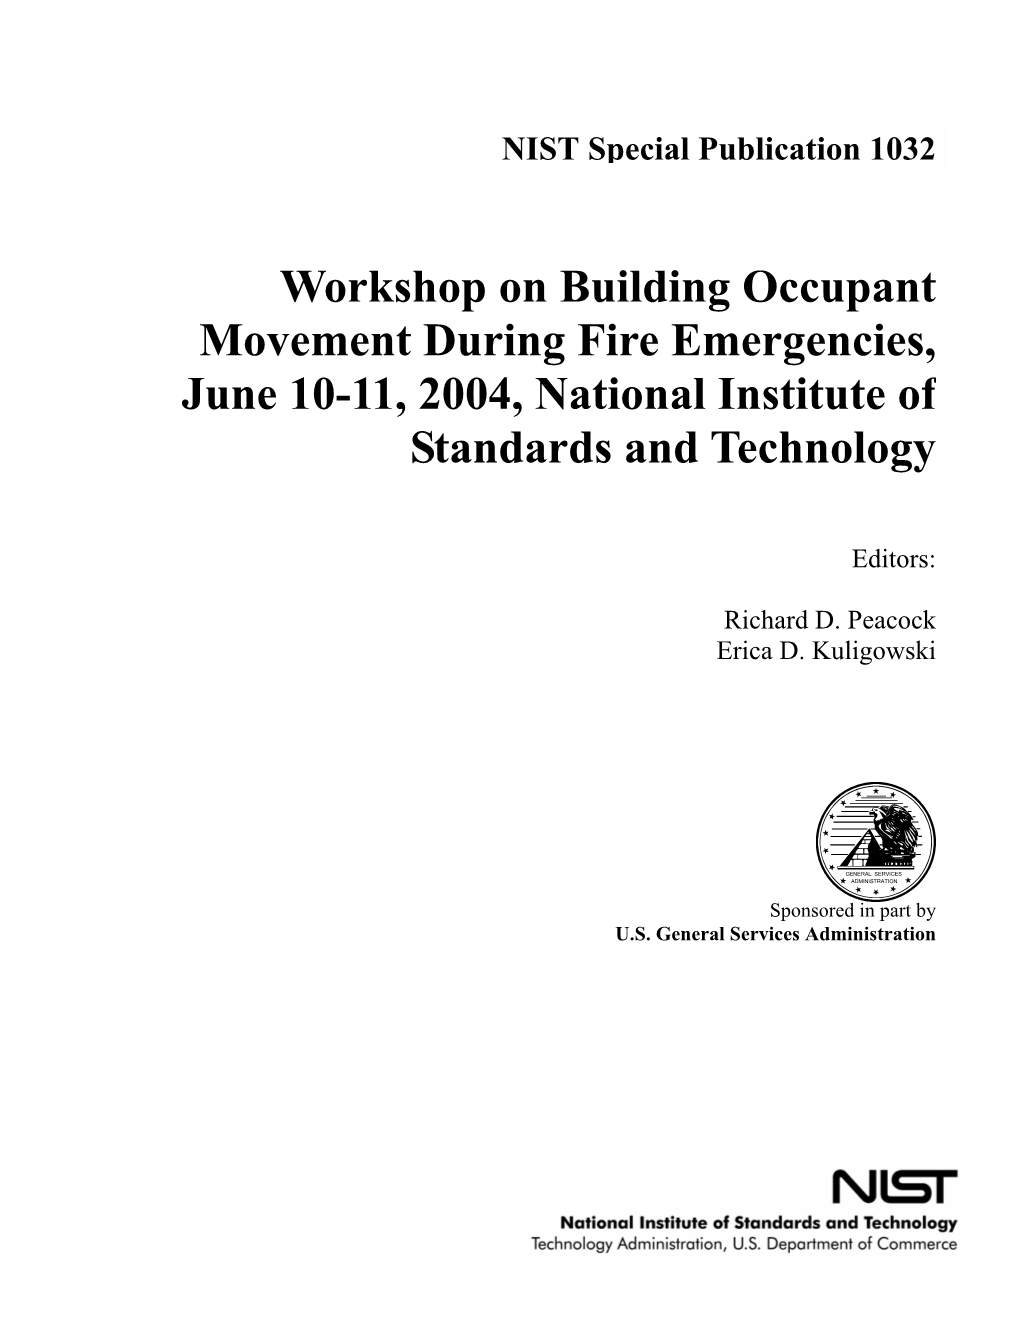 Workshop on Building Occupant Movement During Fire Emergencies, June 10-11, 2004, National Institute of Standards and Technology